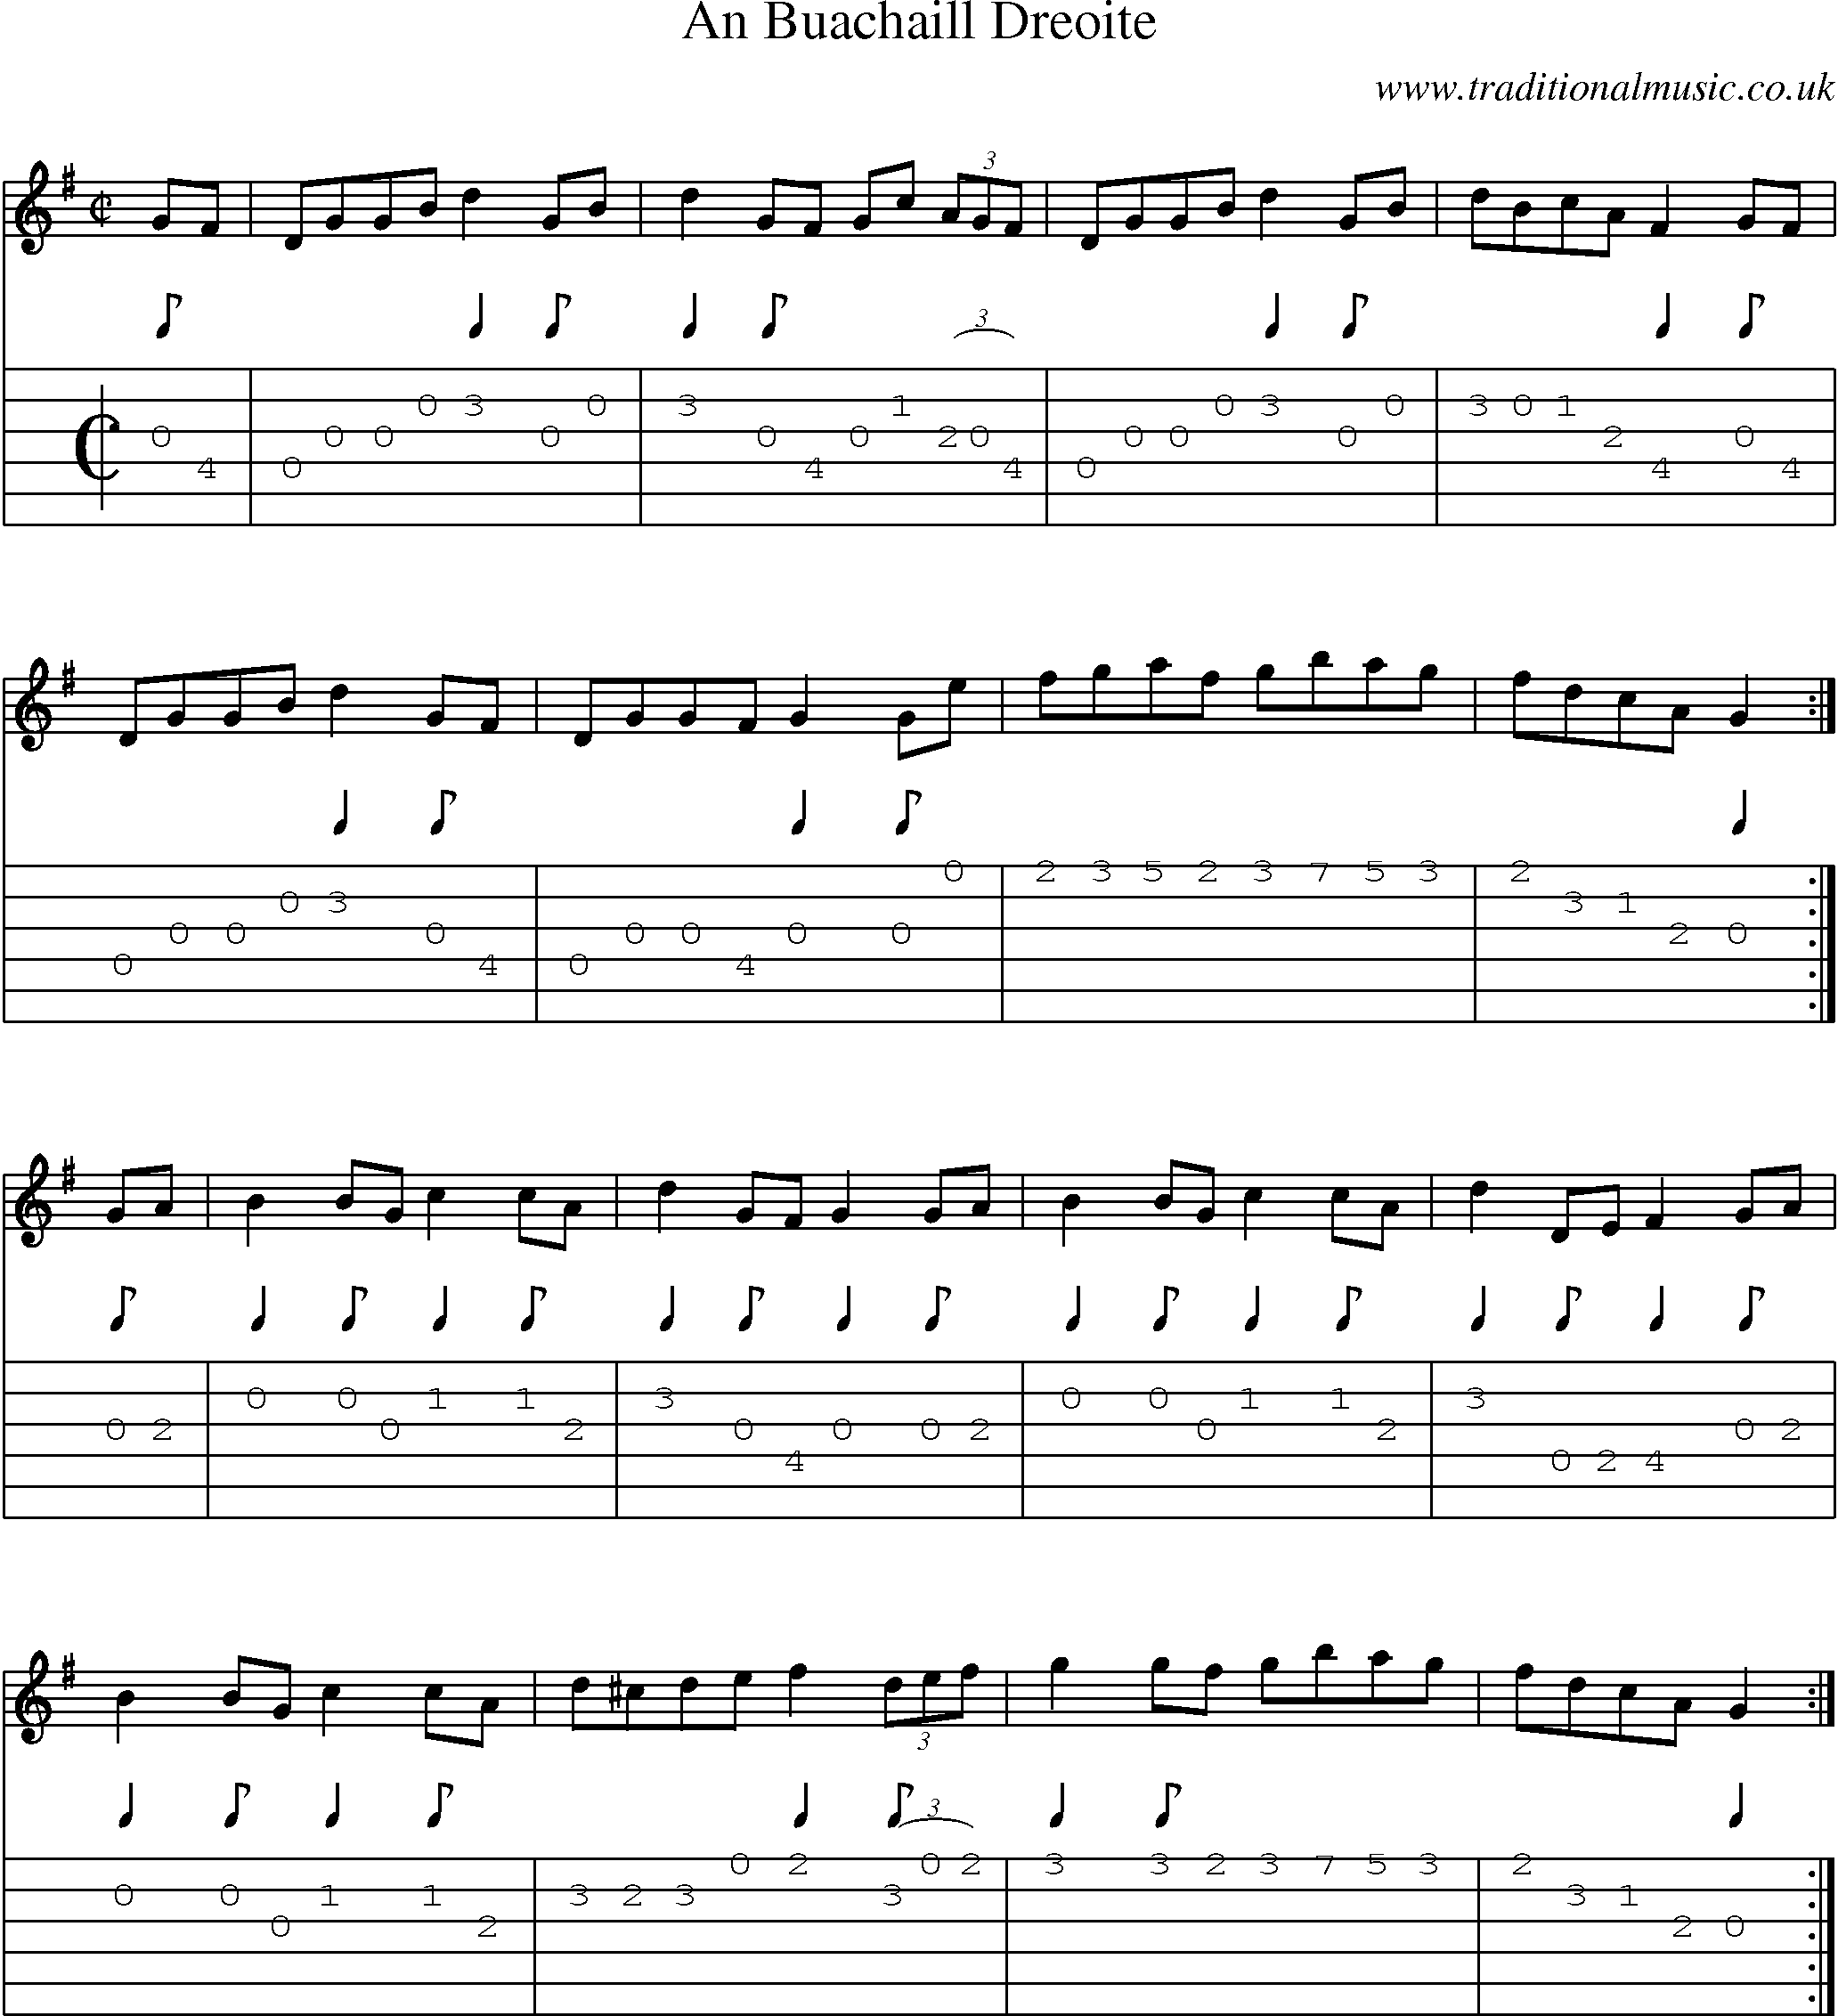 Music Score and Guitar Tabs for An Buachaill Dreoite